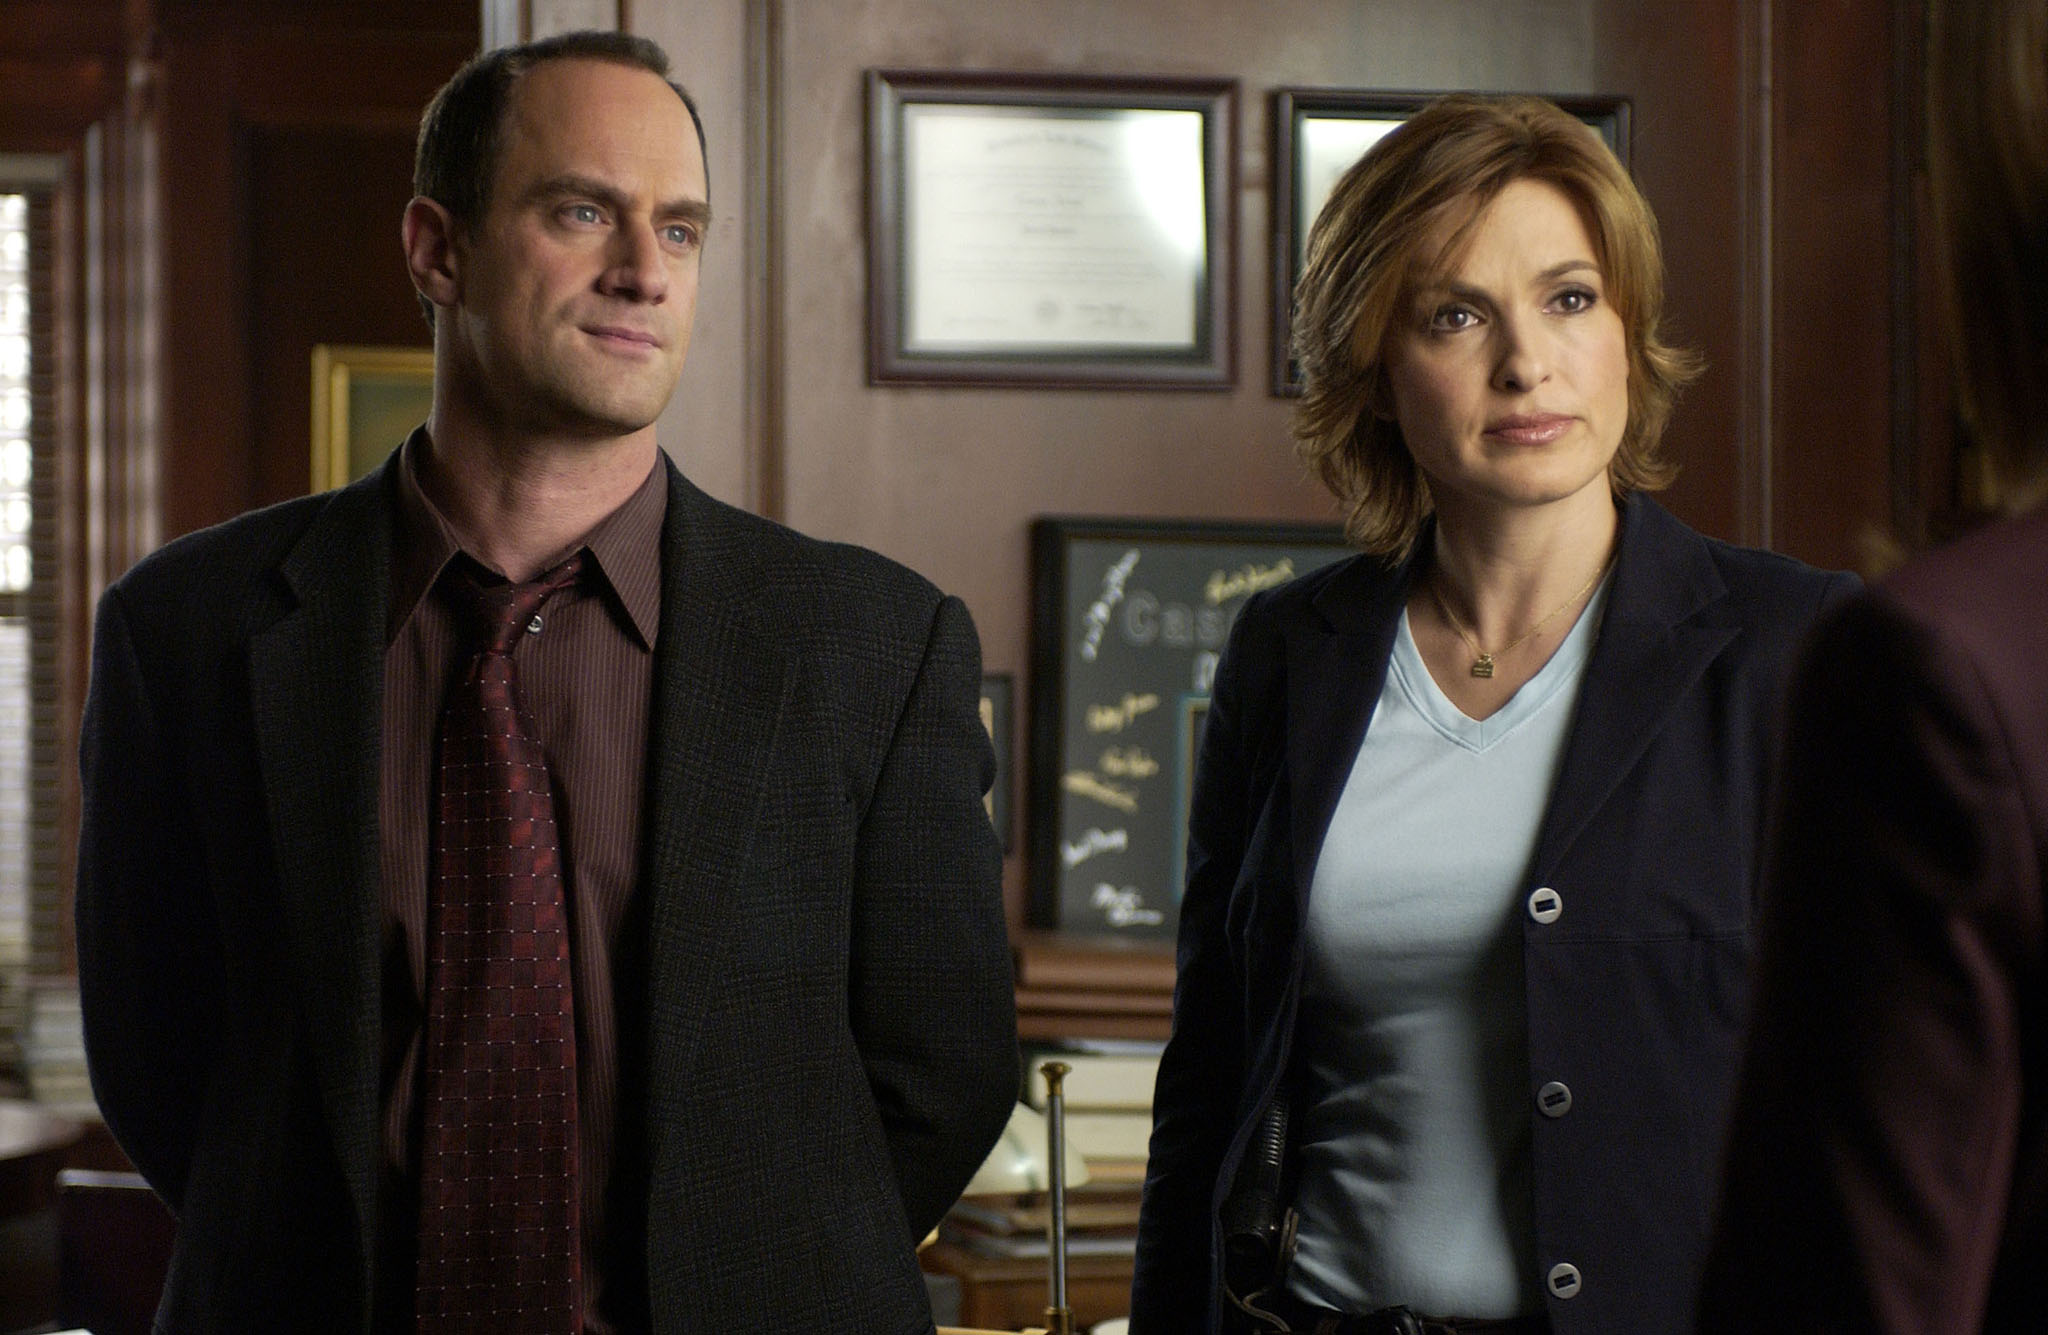 detective-duos-2013-law-order1.jpg